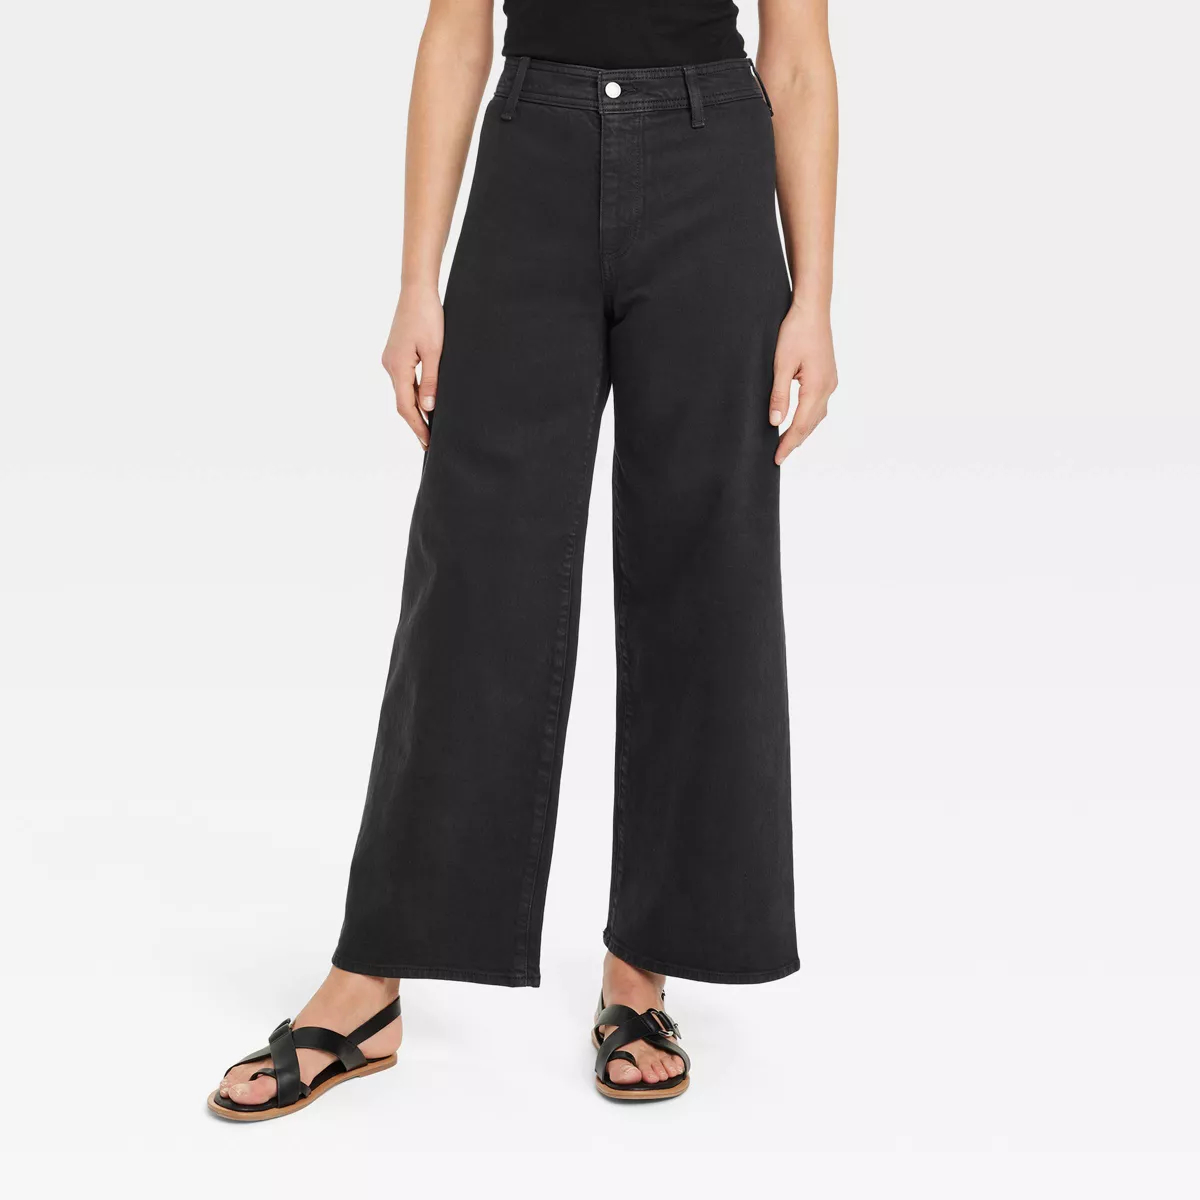 Wide-leg black jeans paired with strappy sandals, image focuses on lower half of the body